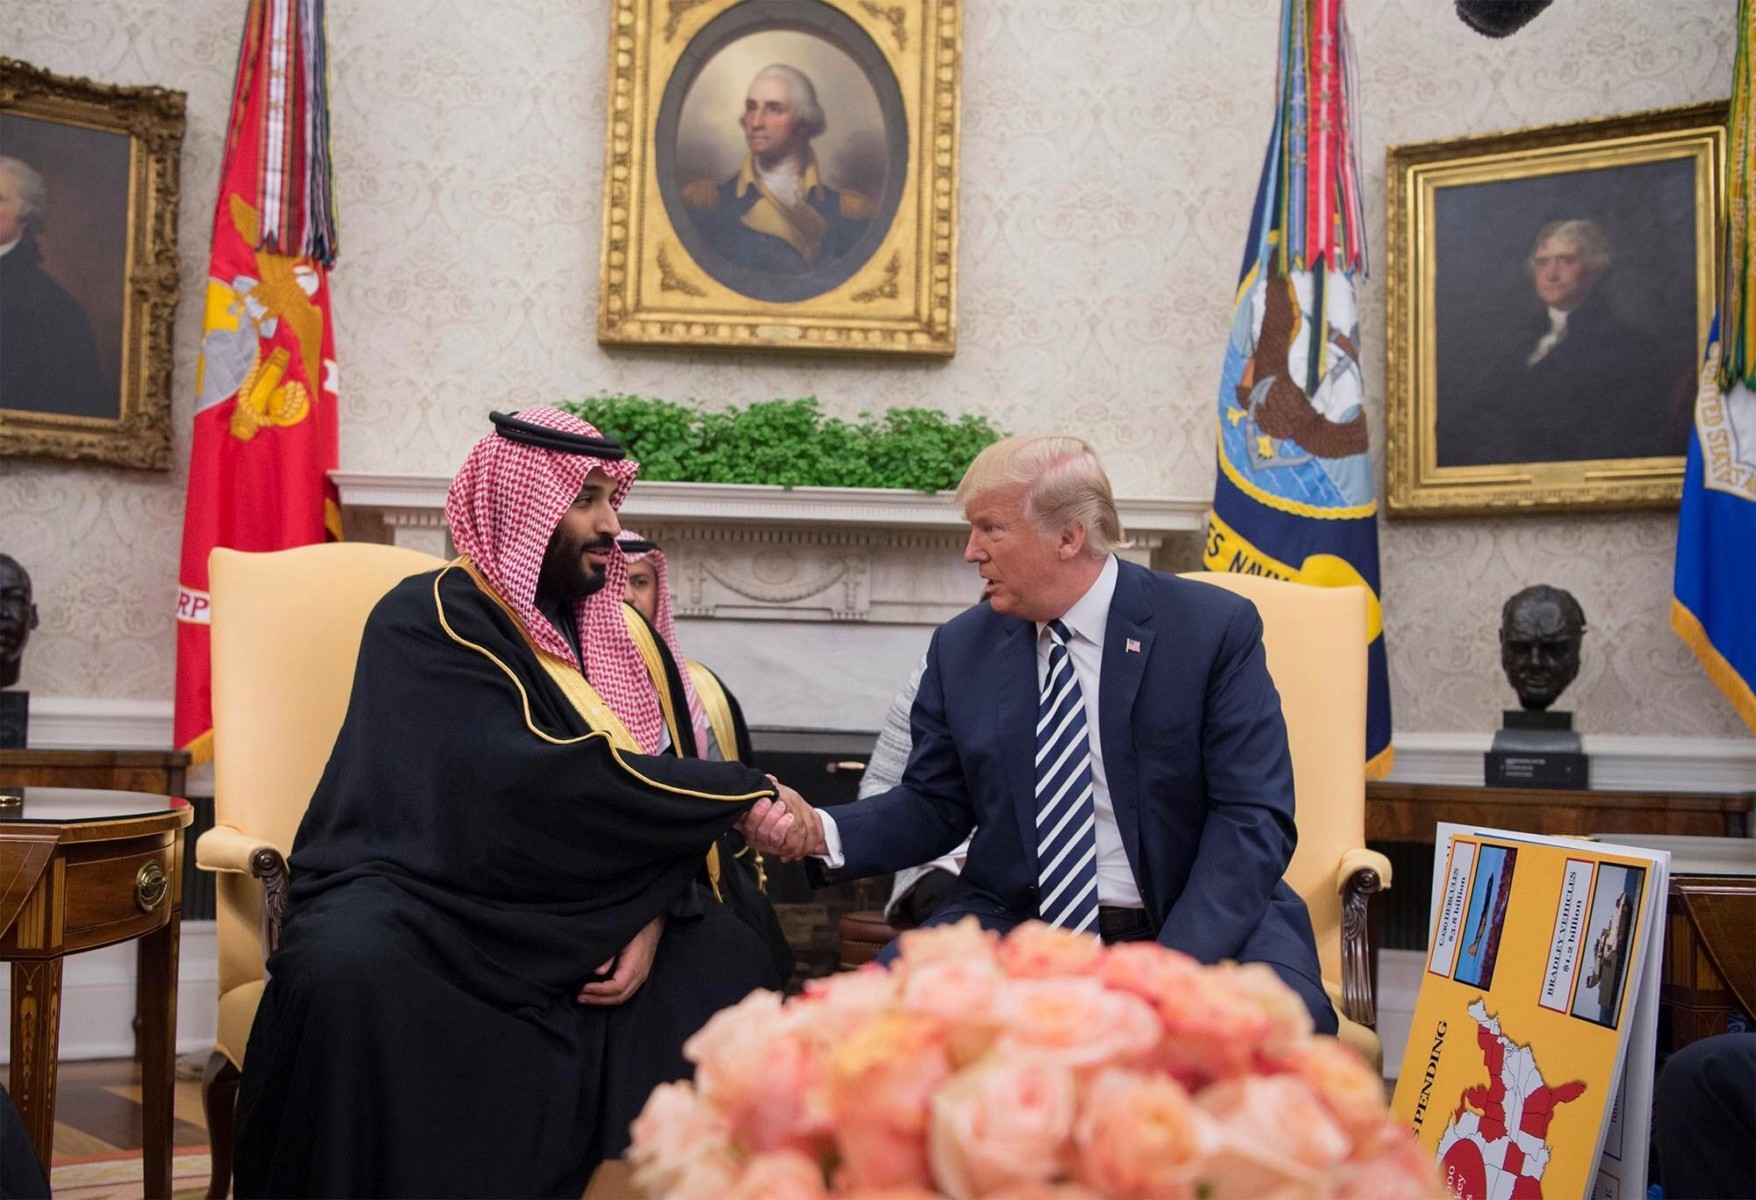 , Newcastle takeover: Mohammad bin Salman owns world’s most expensive home, has a Da Vinci painting and is pals with Trump